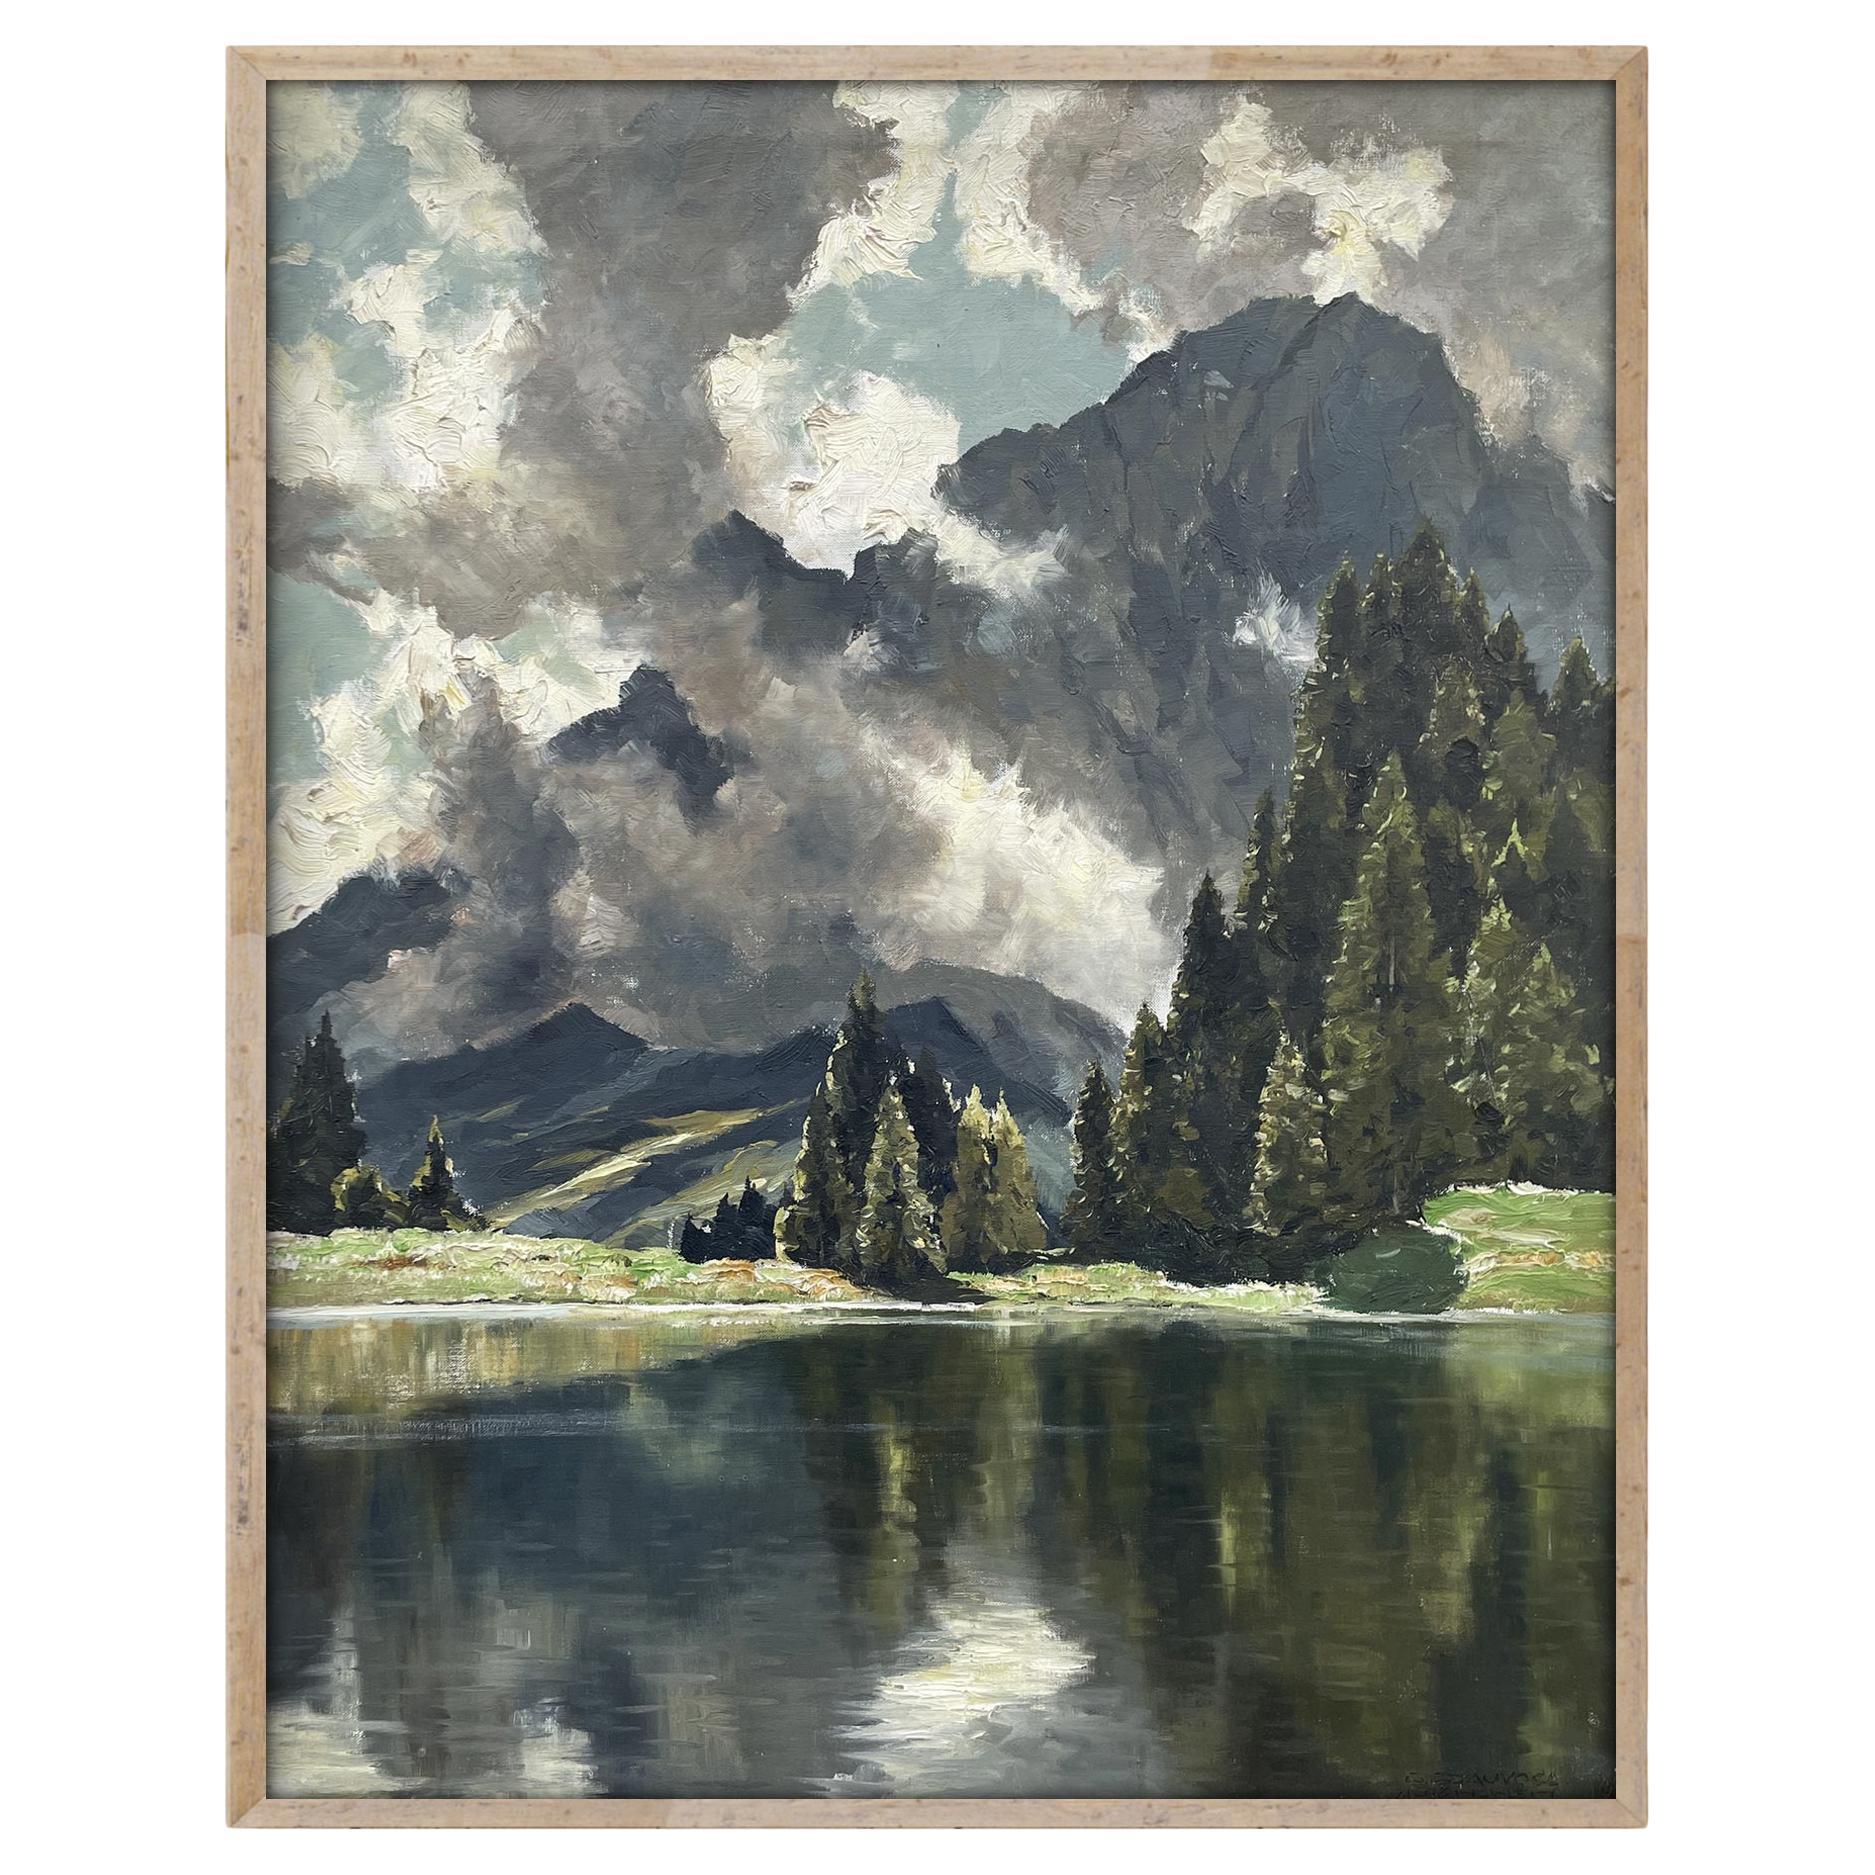 View of Lake Limides Italian Dolomites Oil on Canvas by Georg Grauvogl 